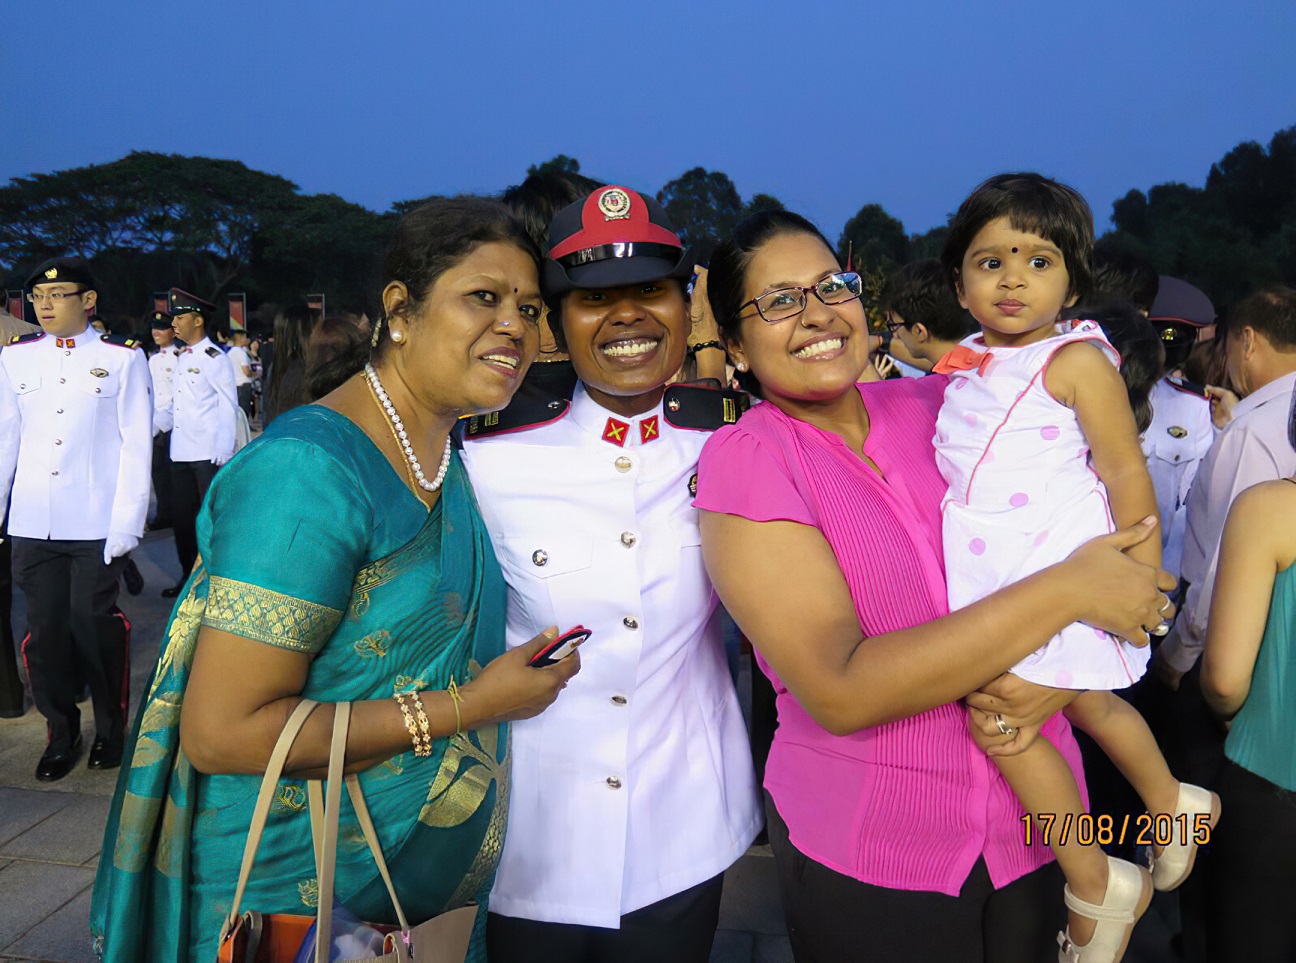 CPT Anithra (second from left) with her family during her Officer Cadet Commissioning Parade.